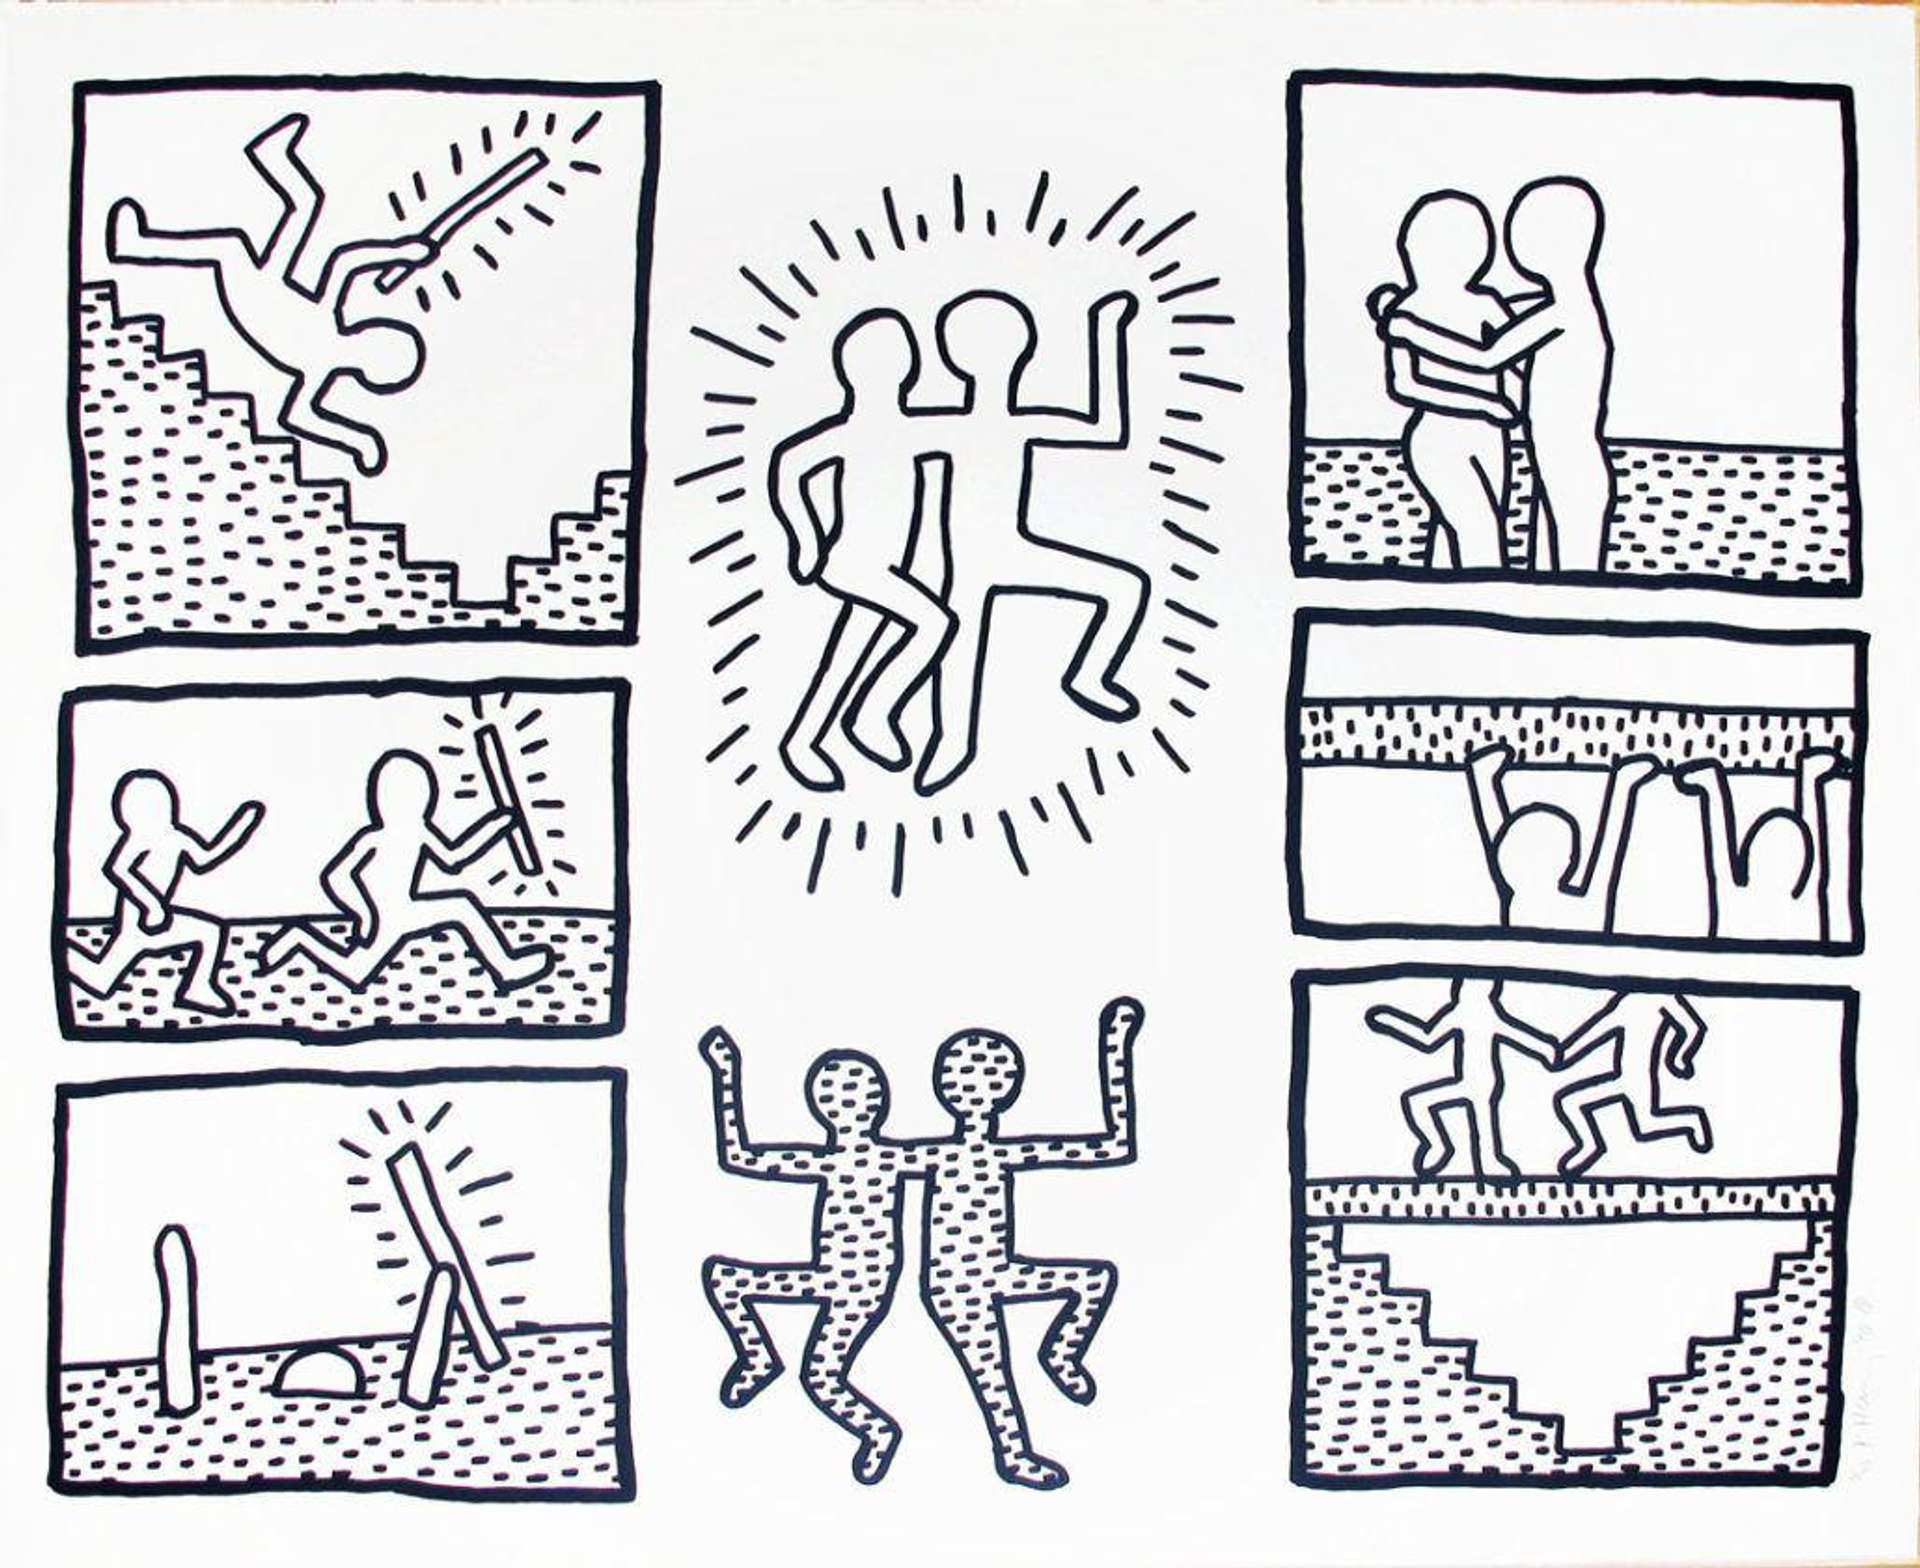 Keith Haring’s The Blueprint Drawings 6. A Pop Art screenprint of a black and white comic strip of various scenes including two figures dancing and embracing each other.